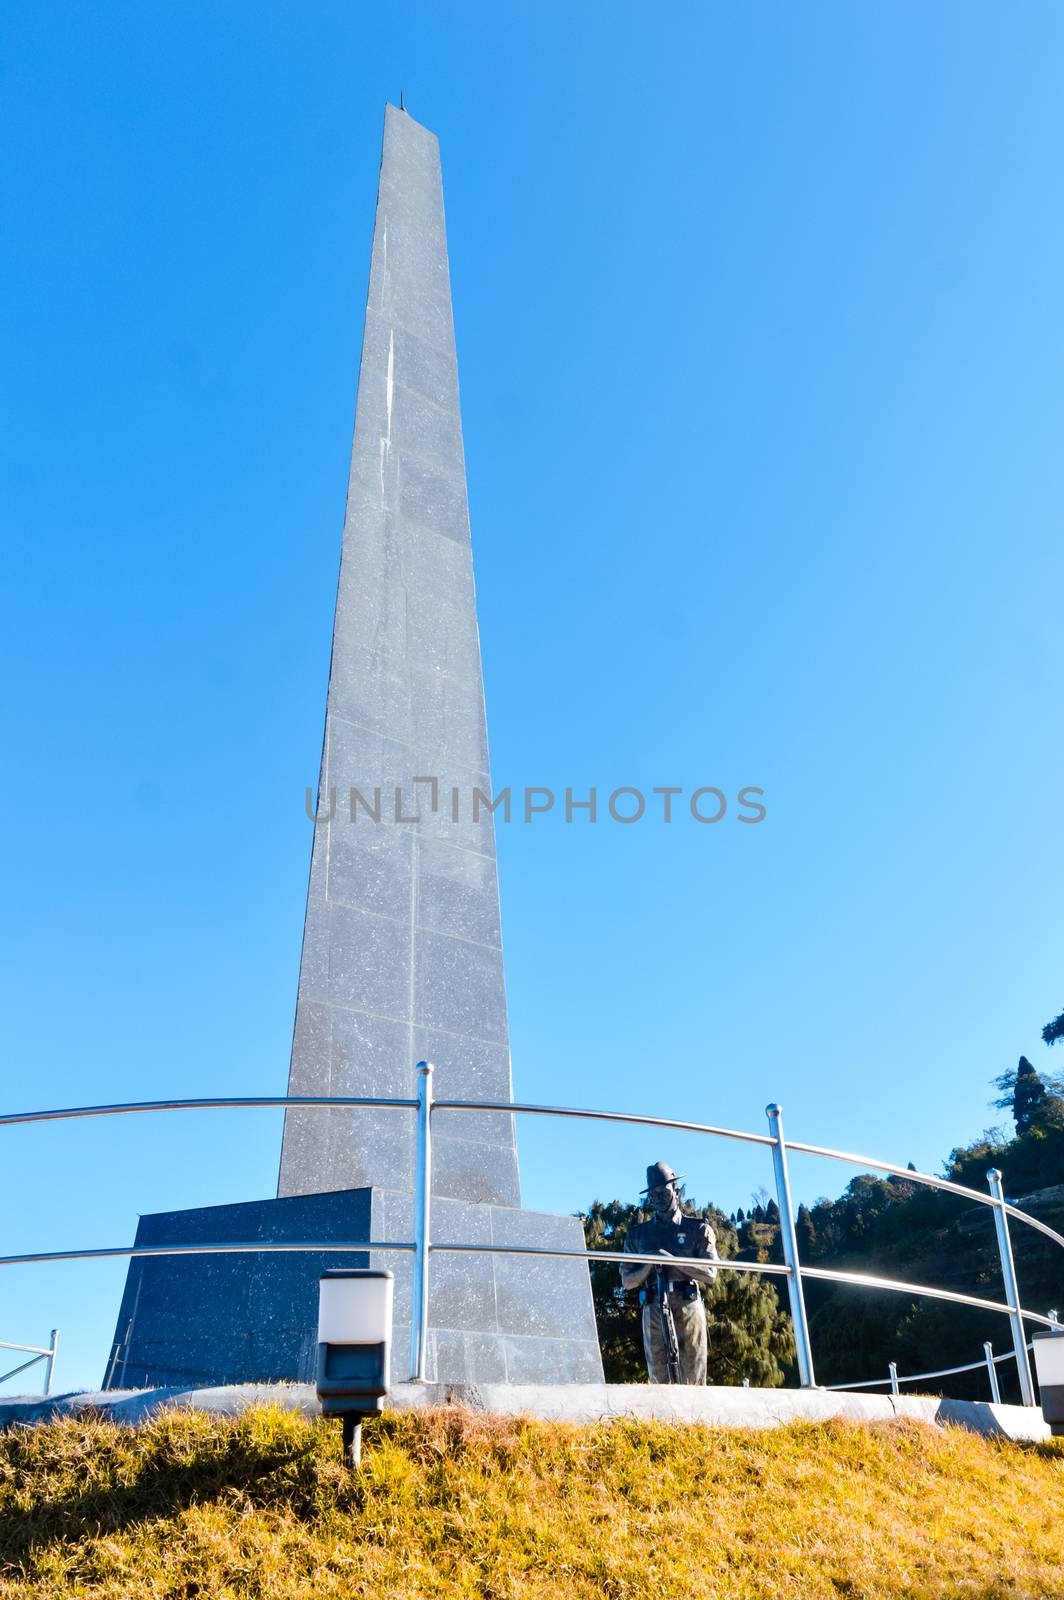 View of Batasia loop war memorial, The famous Gorkha war memorial in Ghum, Darjeeling India. The place opened in1995 to commemorate soldiers who lost their lives in struggles post Indian independence.